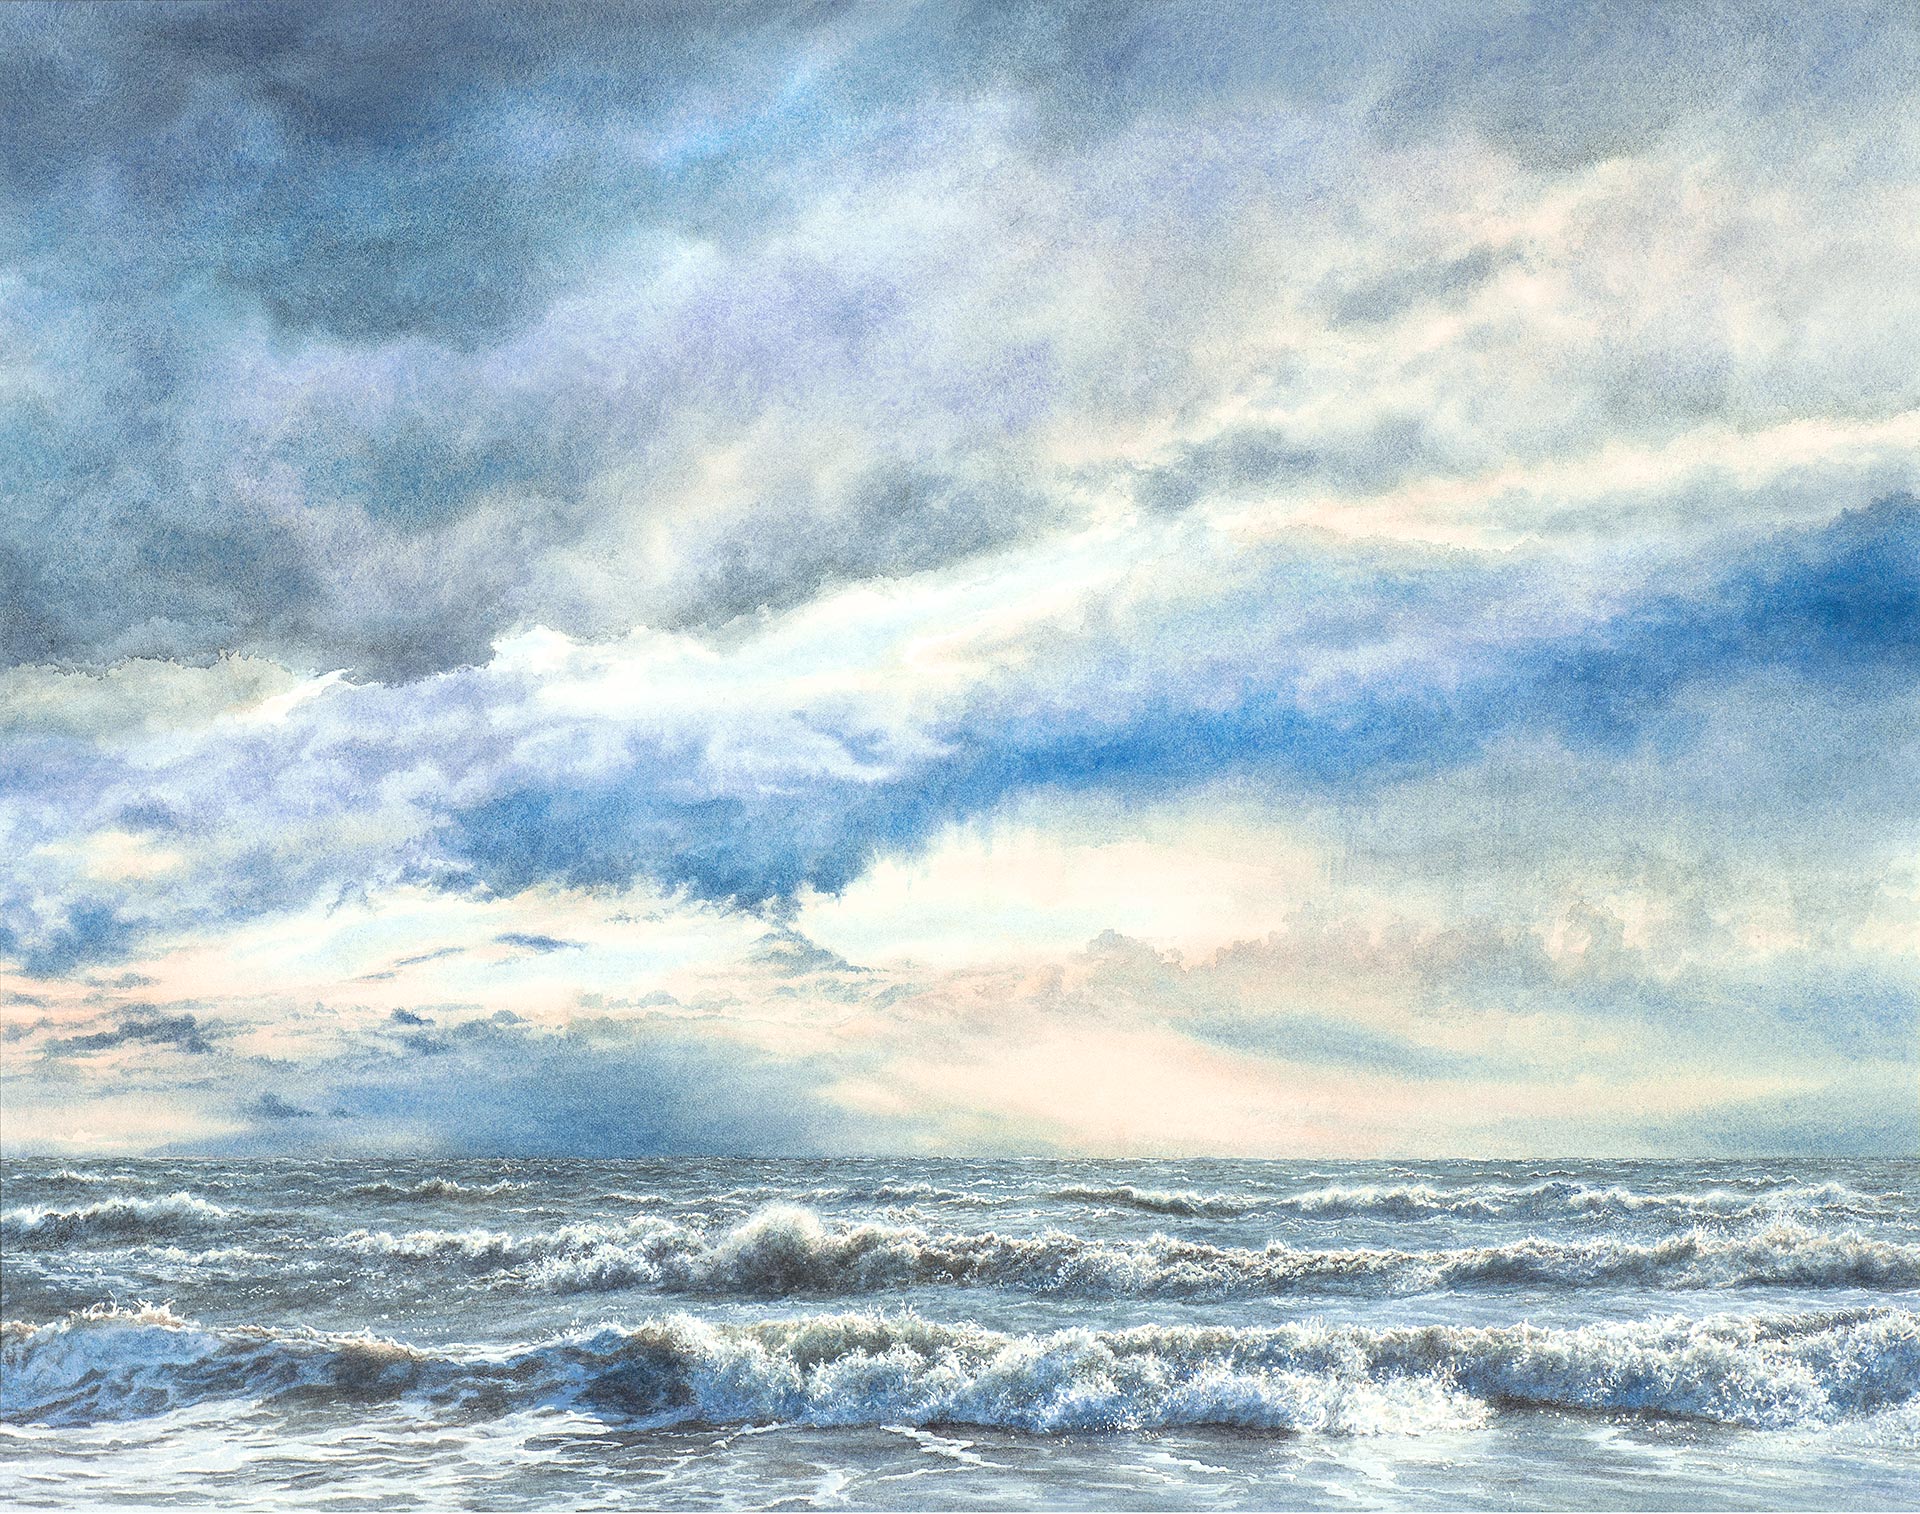 Break in the Storm. Painting by Felicity Flutter